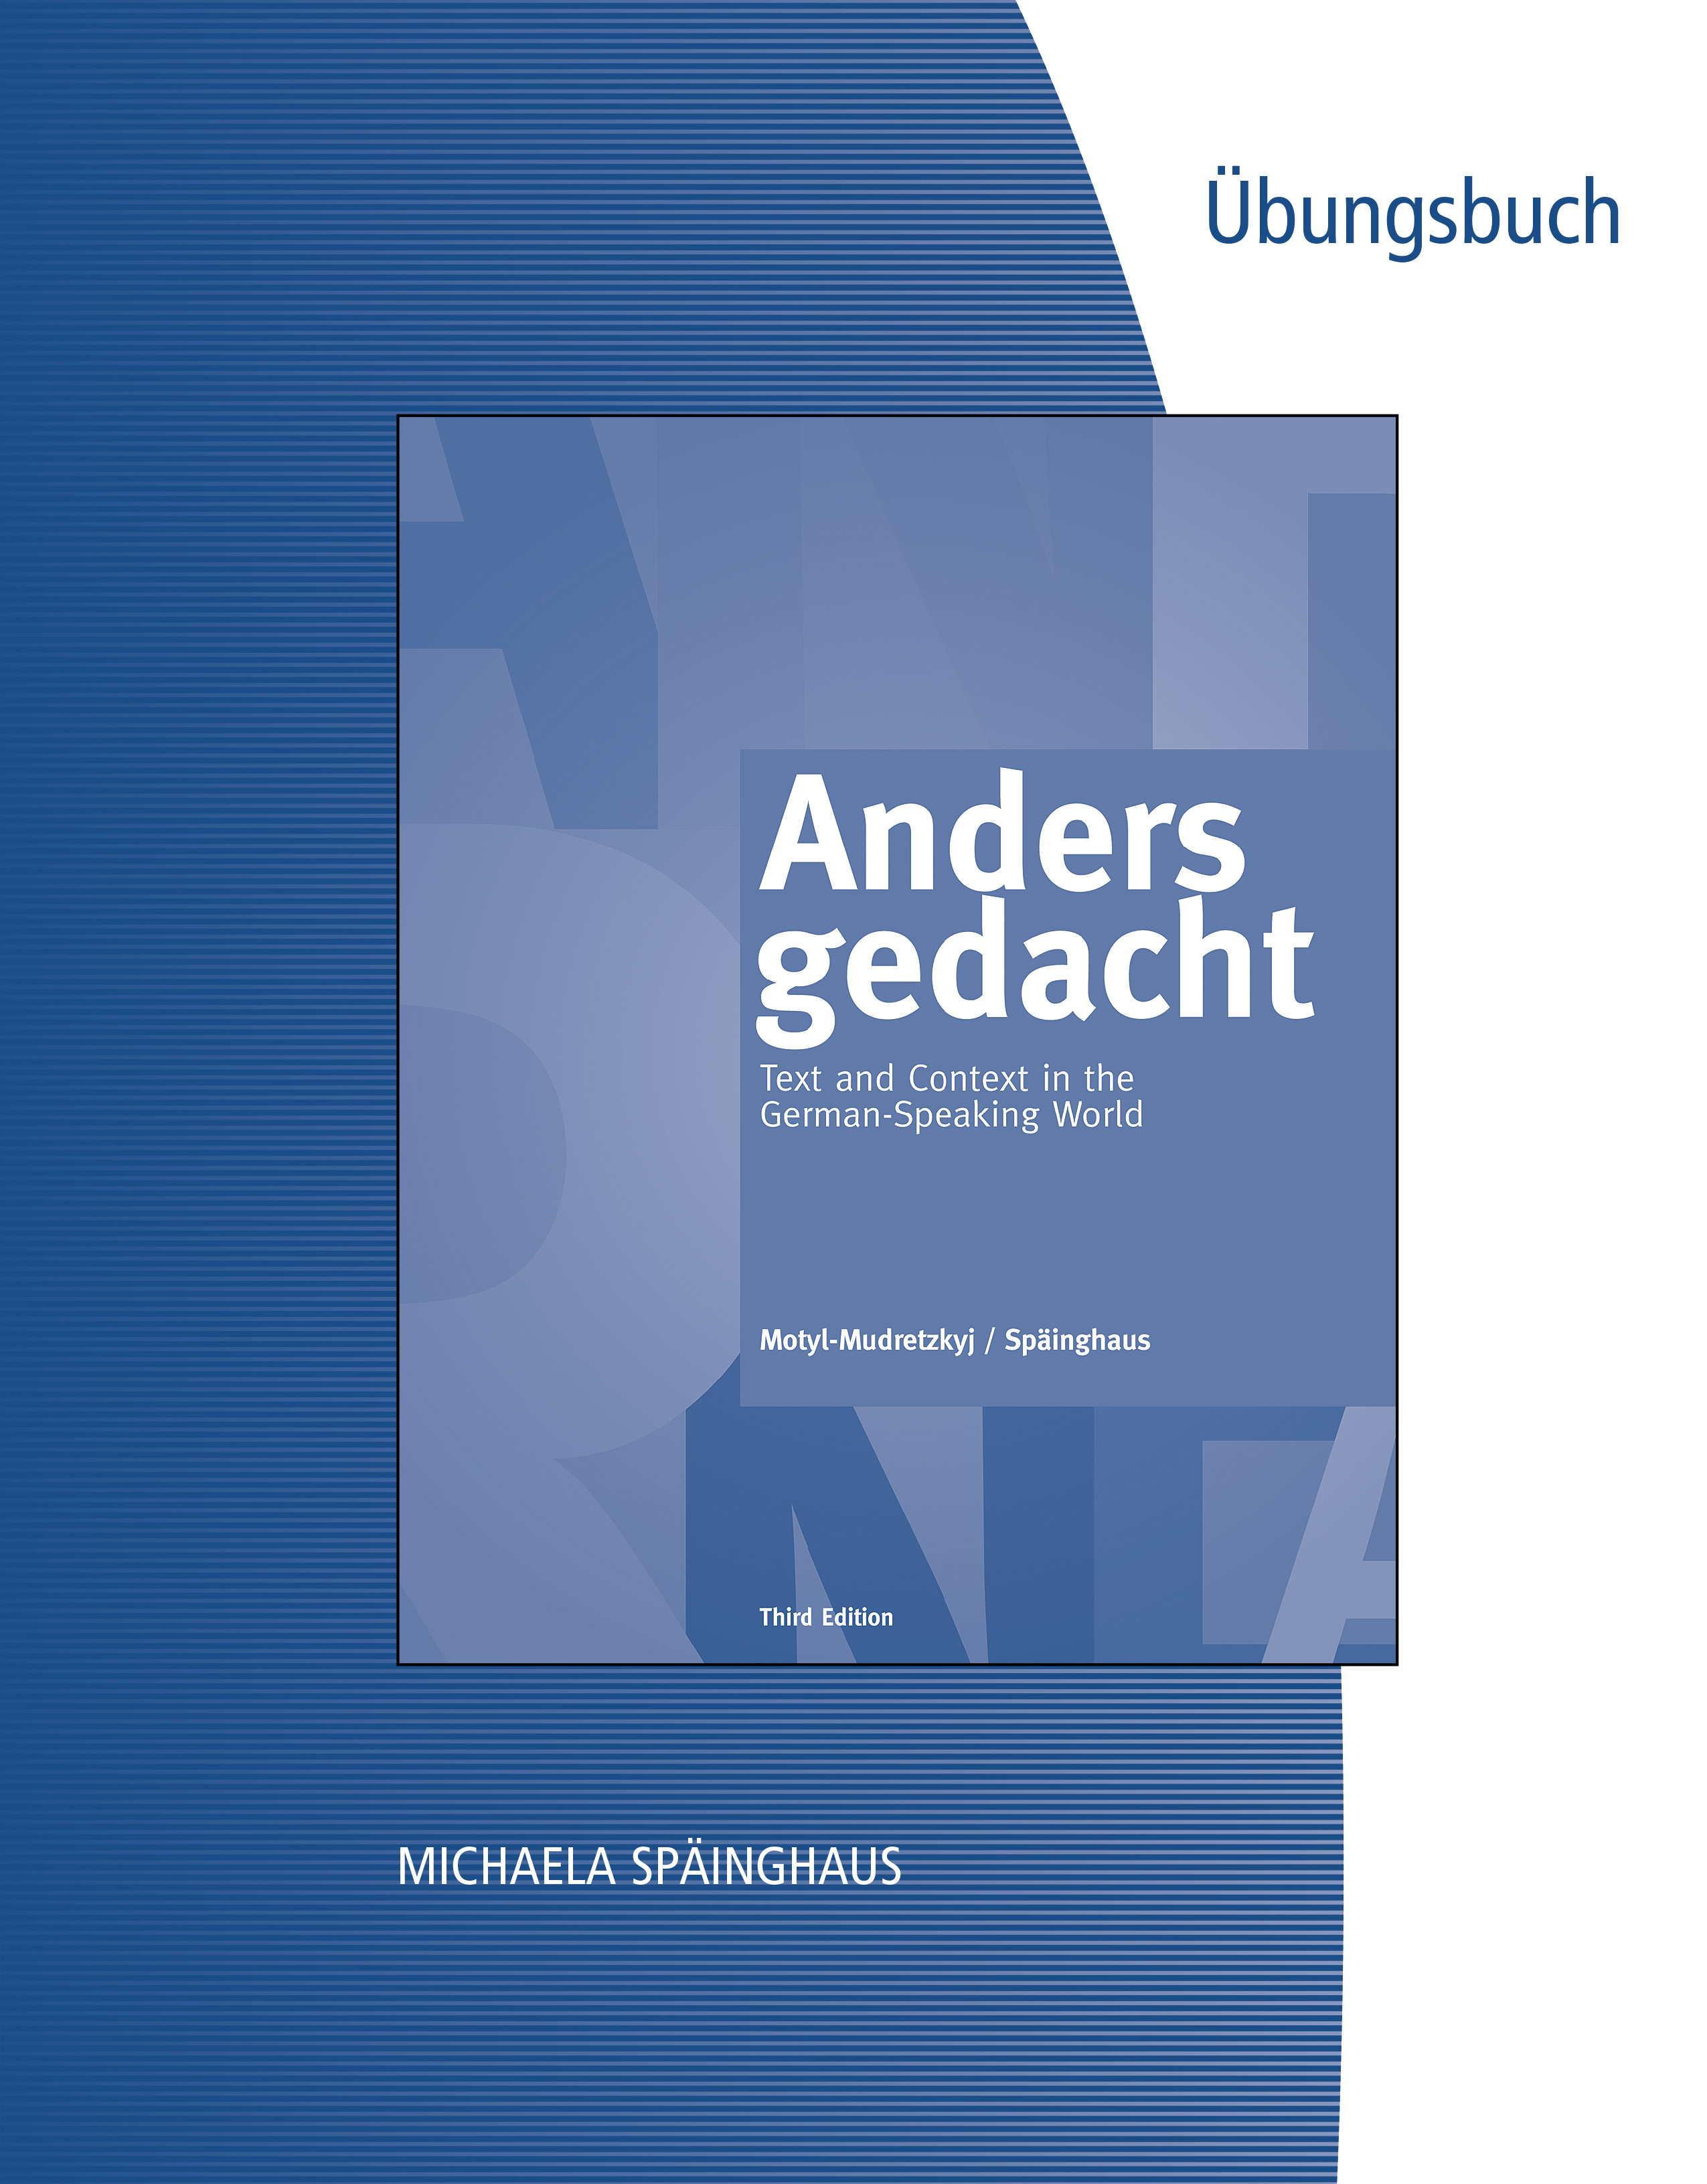 Student Activities Manual for Motyl-Mudretzkyj/Sp鐩瞚nghaus' Anders gedacht: Text and Context in the German-Speaking World